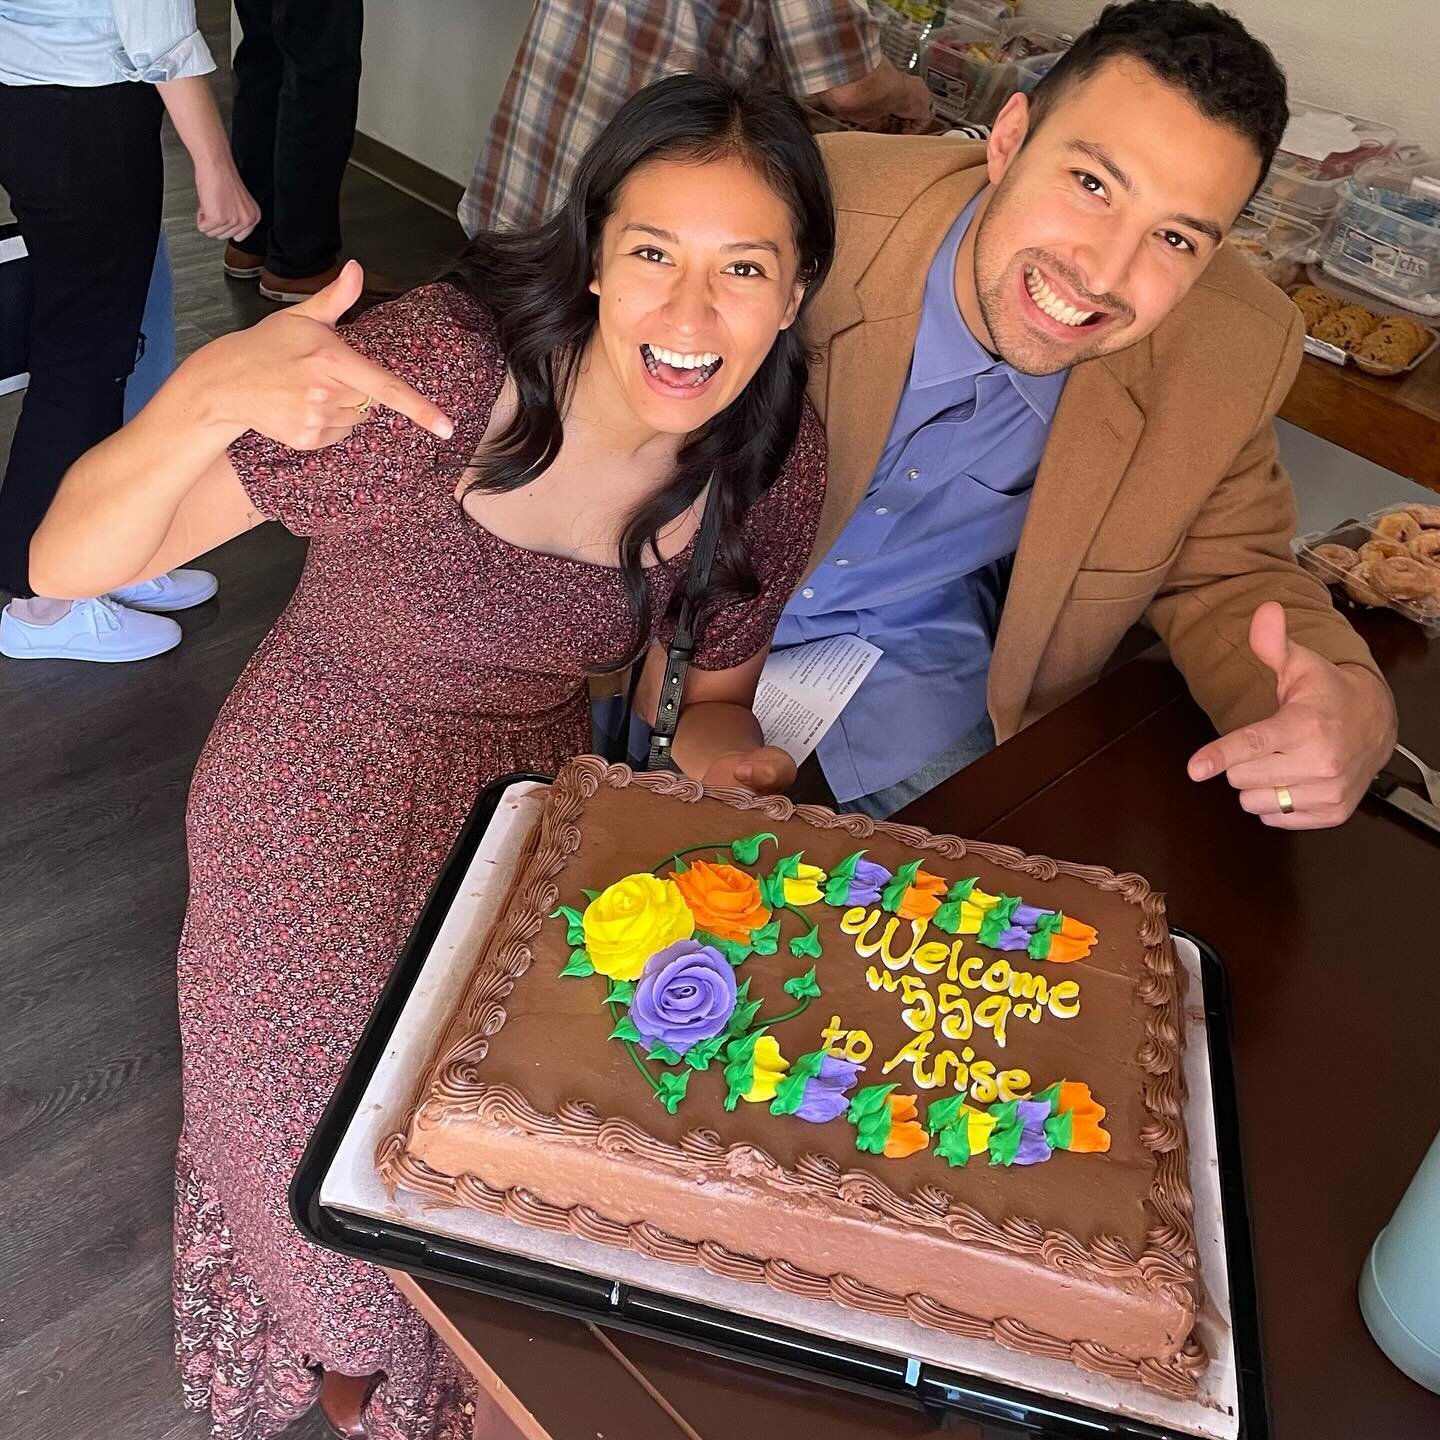 Zoom in on the cake. 😉

Arise is thrilled to welcome &ldquo;the 559&rdquo; into our church family! 

Don&rsquo;t worry&hellip; 559 isn&rsquo;t a salvation issue 😆 - it&rsquo;s an area code from Fresno, California. 

Rudolph and Irais joined us in m